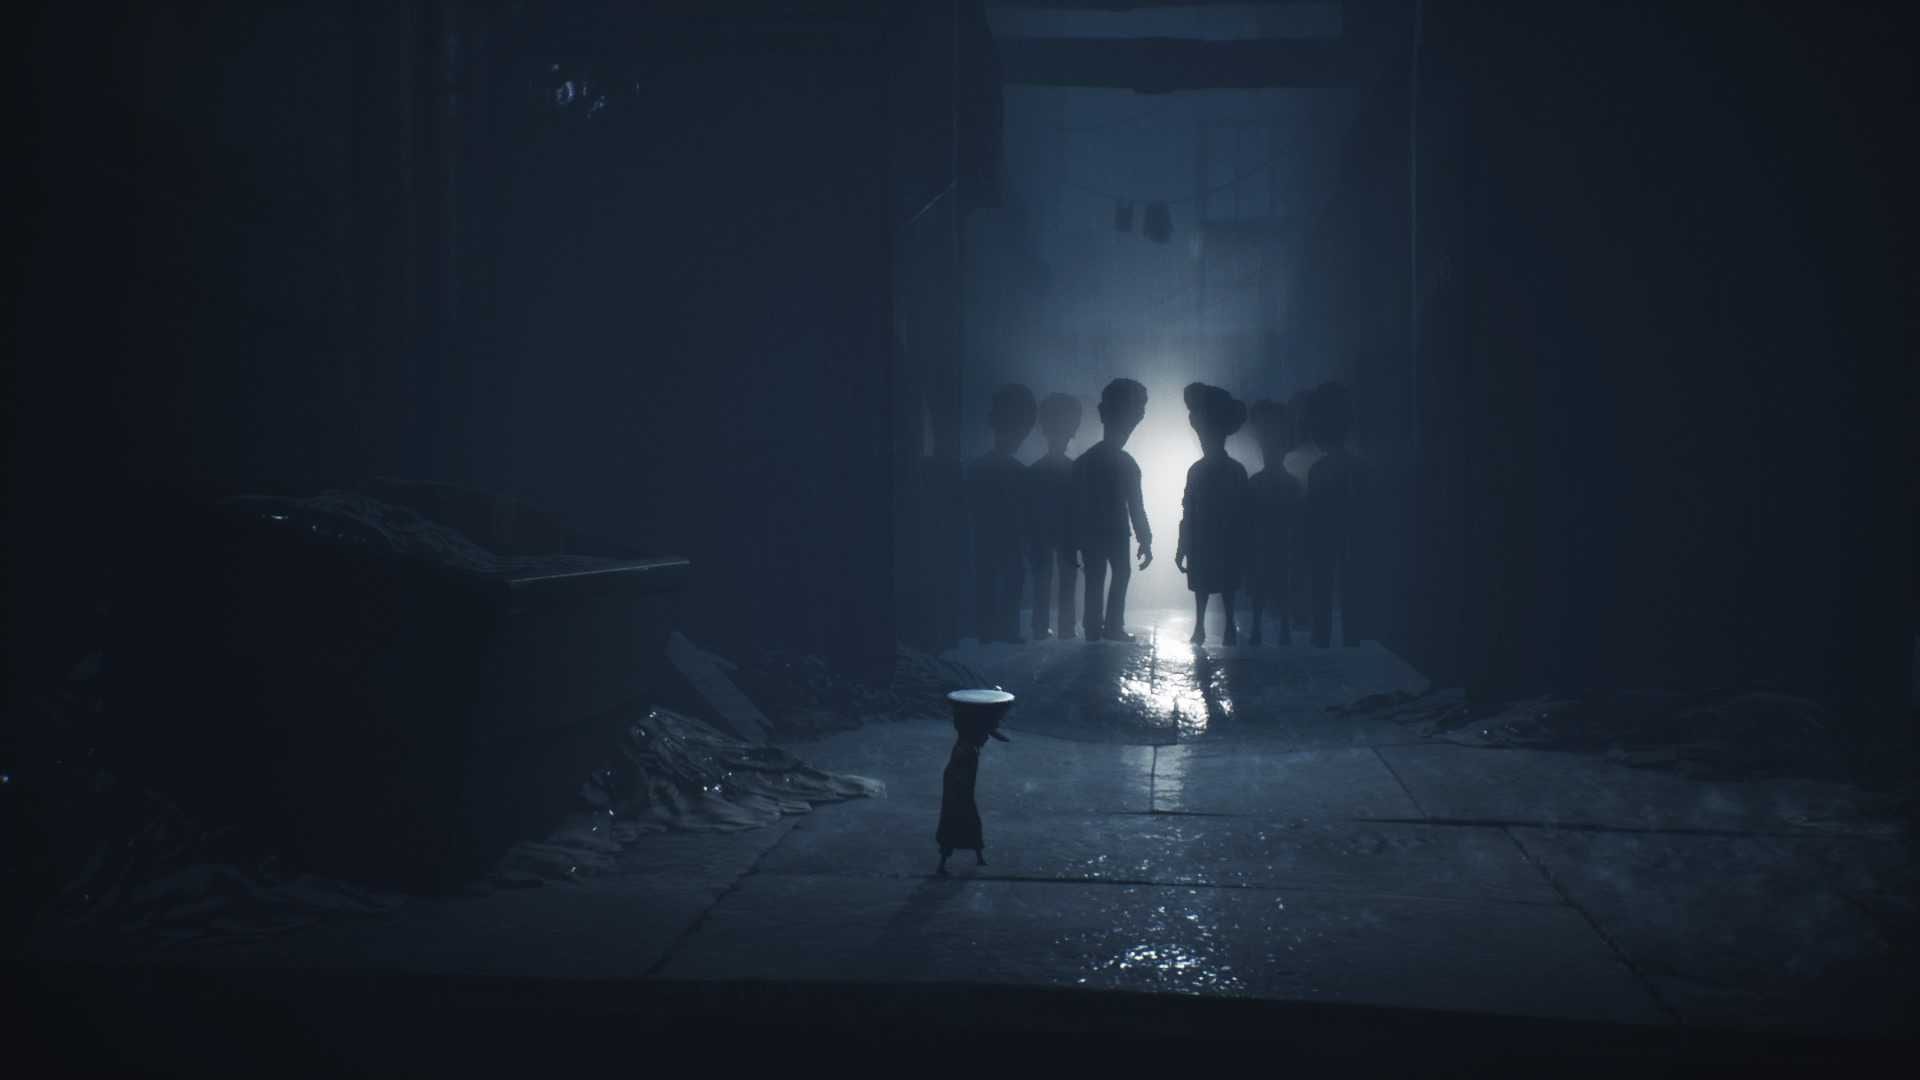 Little Nightmares 2: Is There Co-Op Multiplayer? Answered